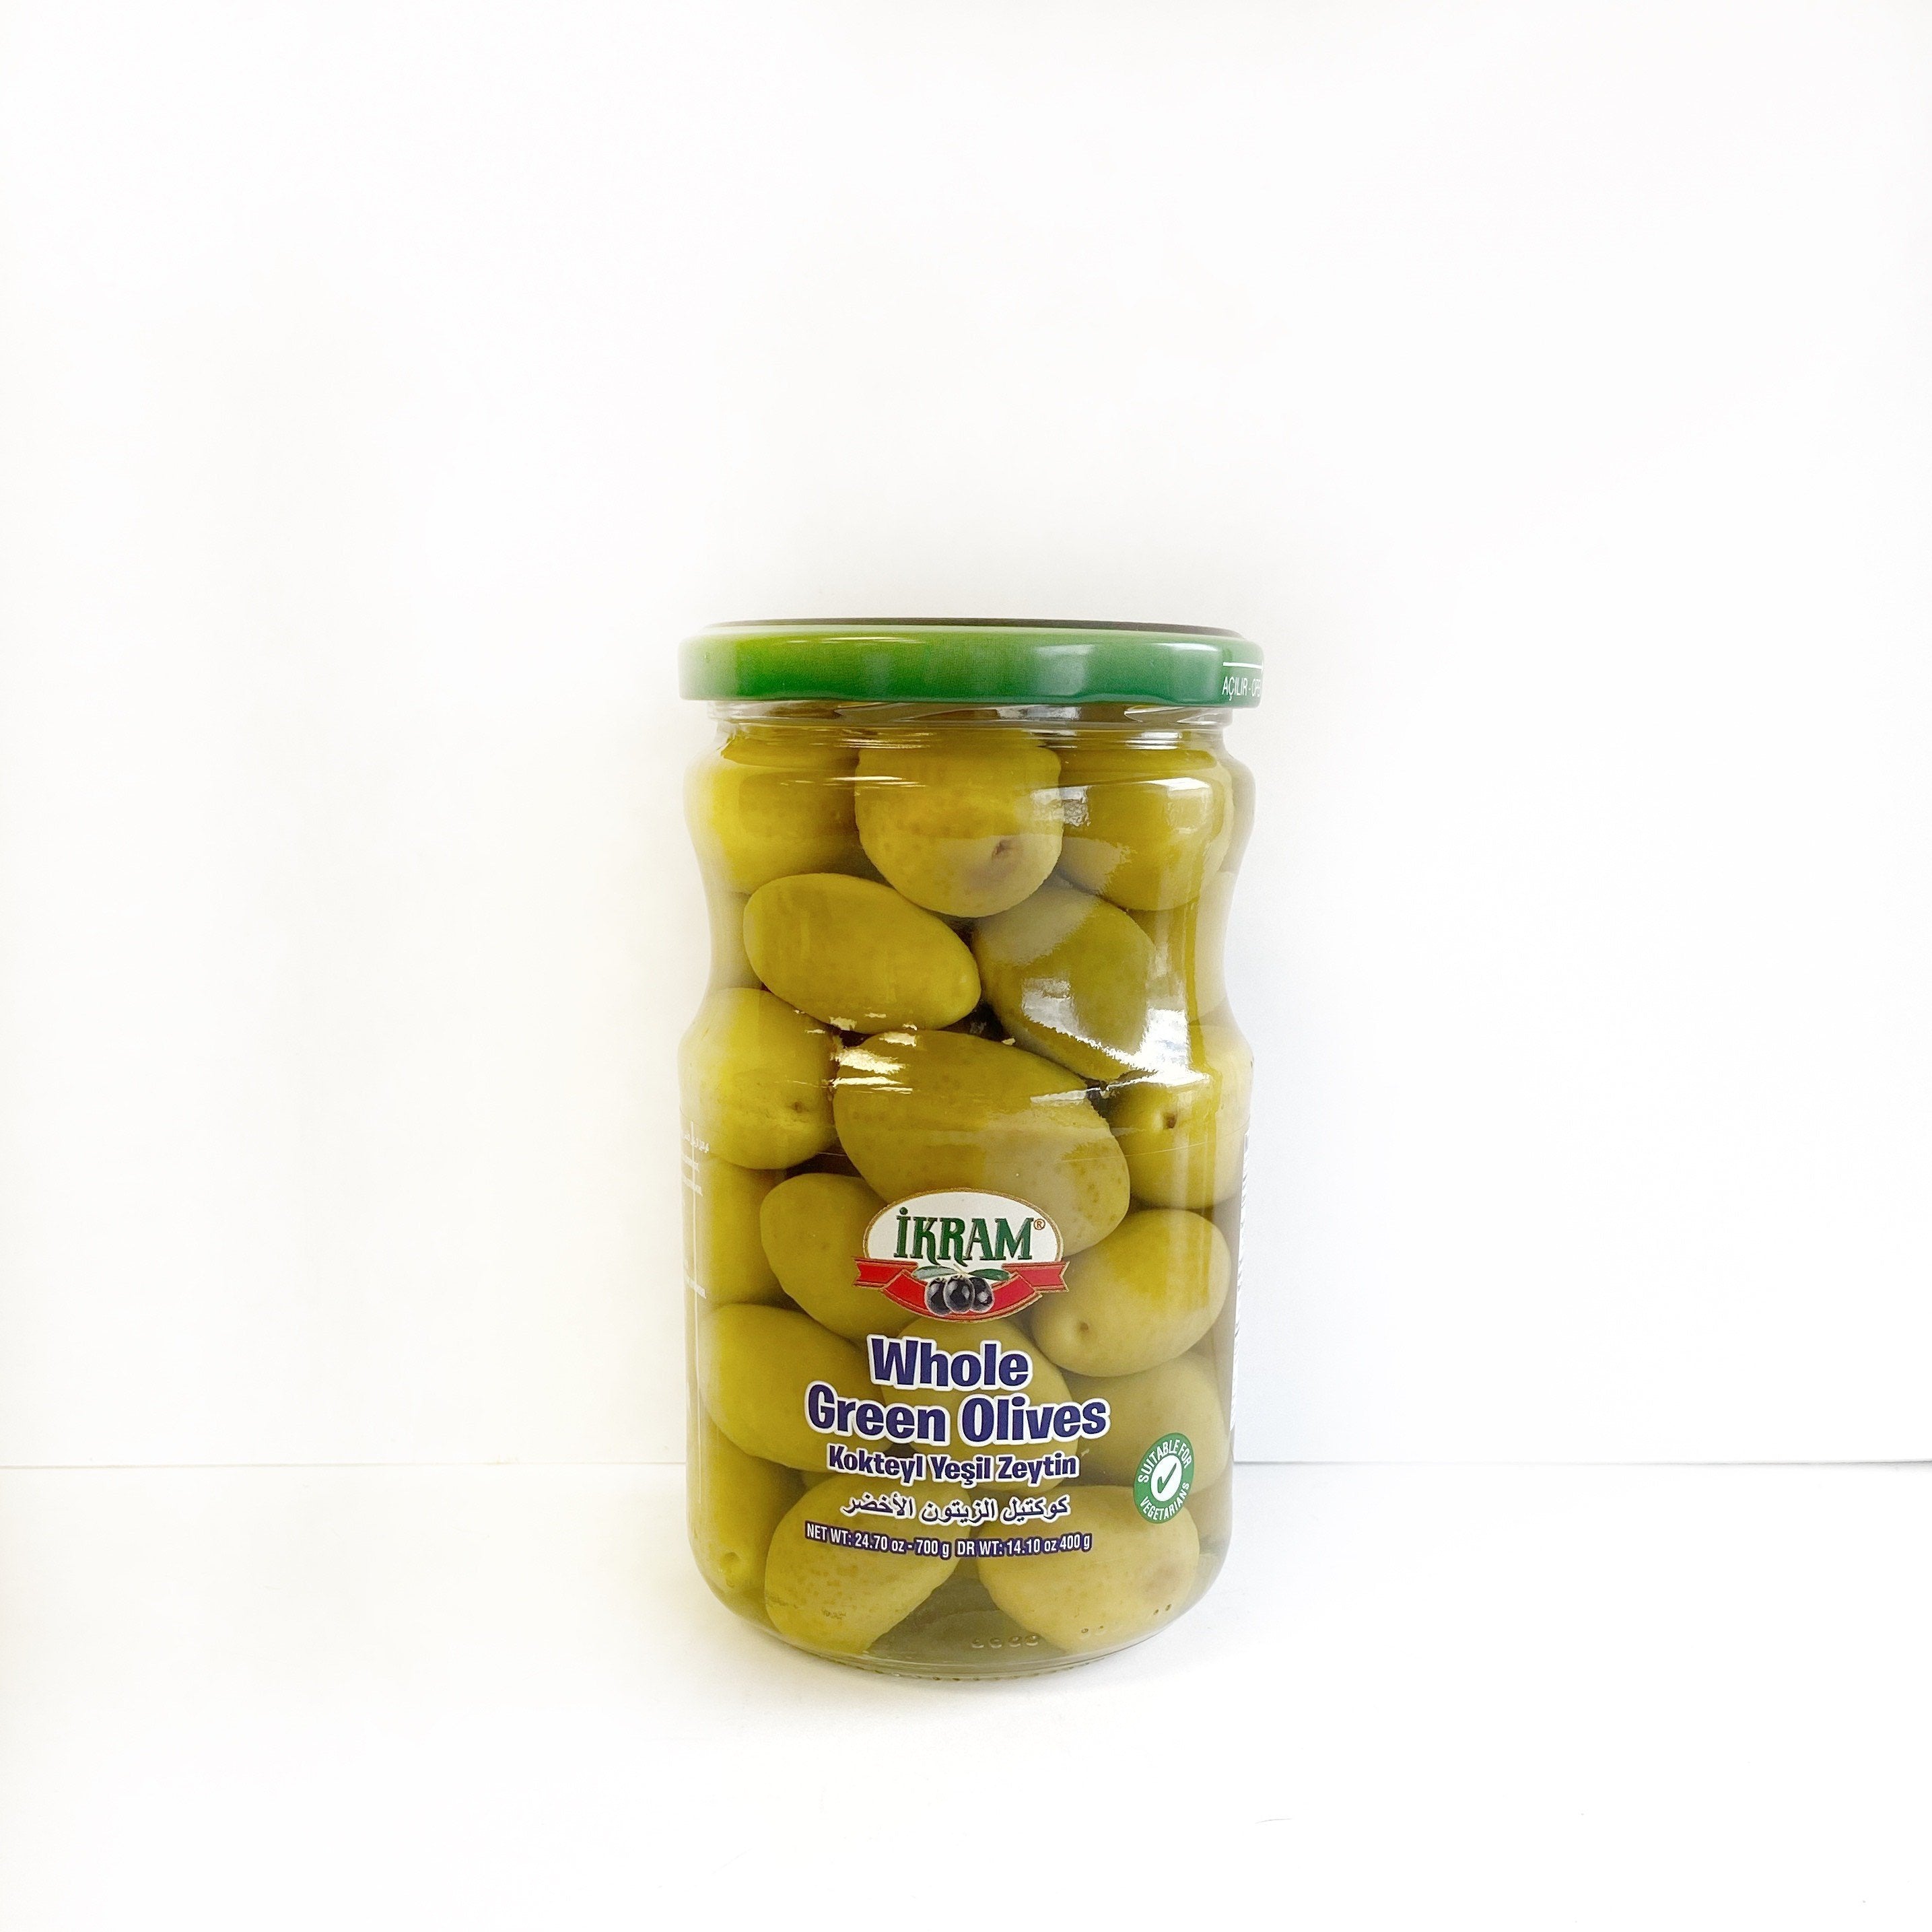 Whole Green Olives - 400g net - GLASS